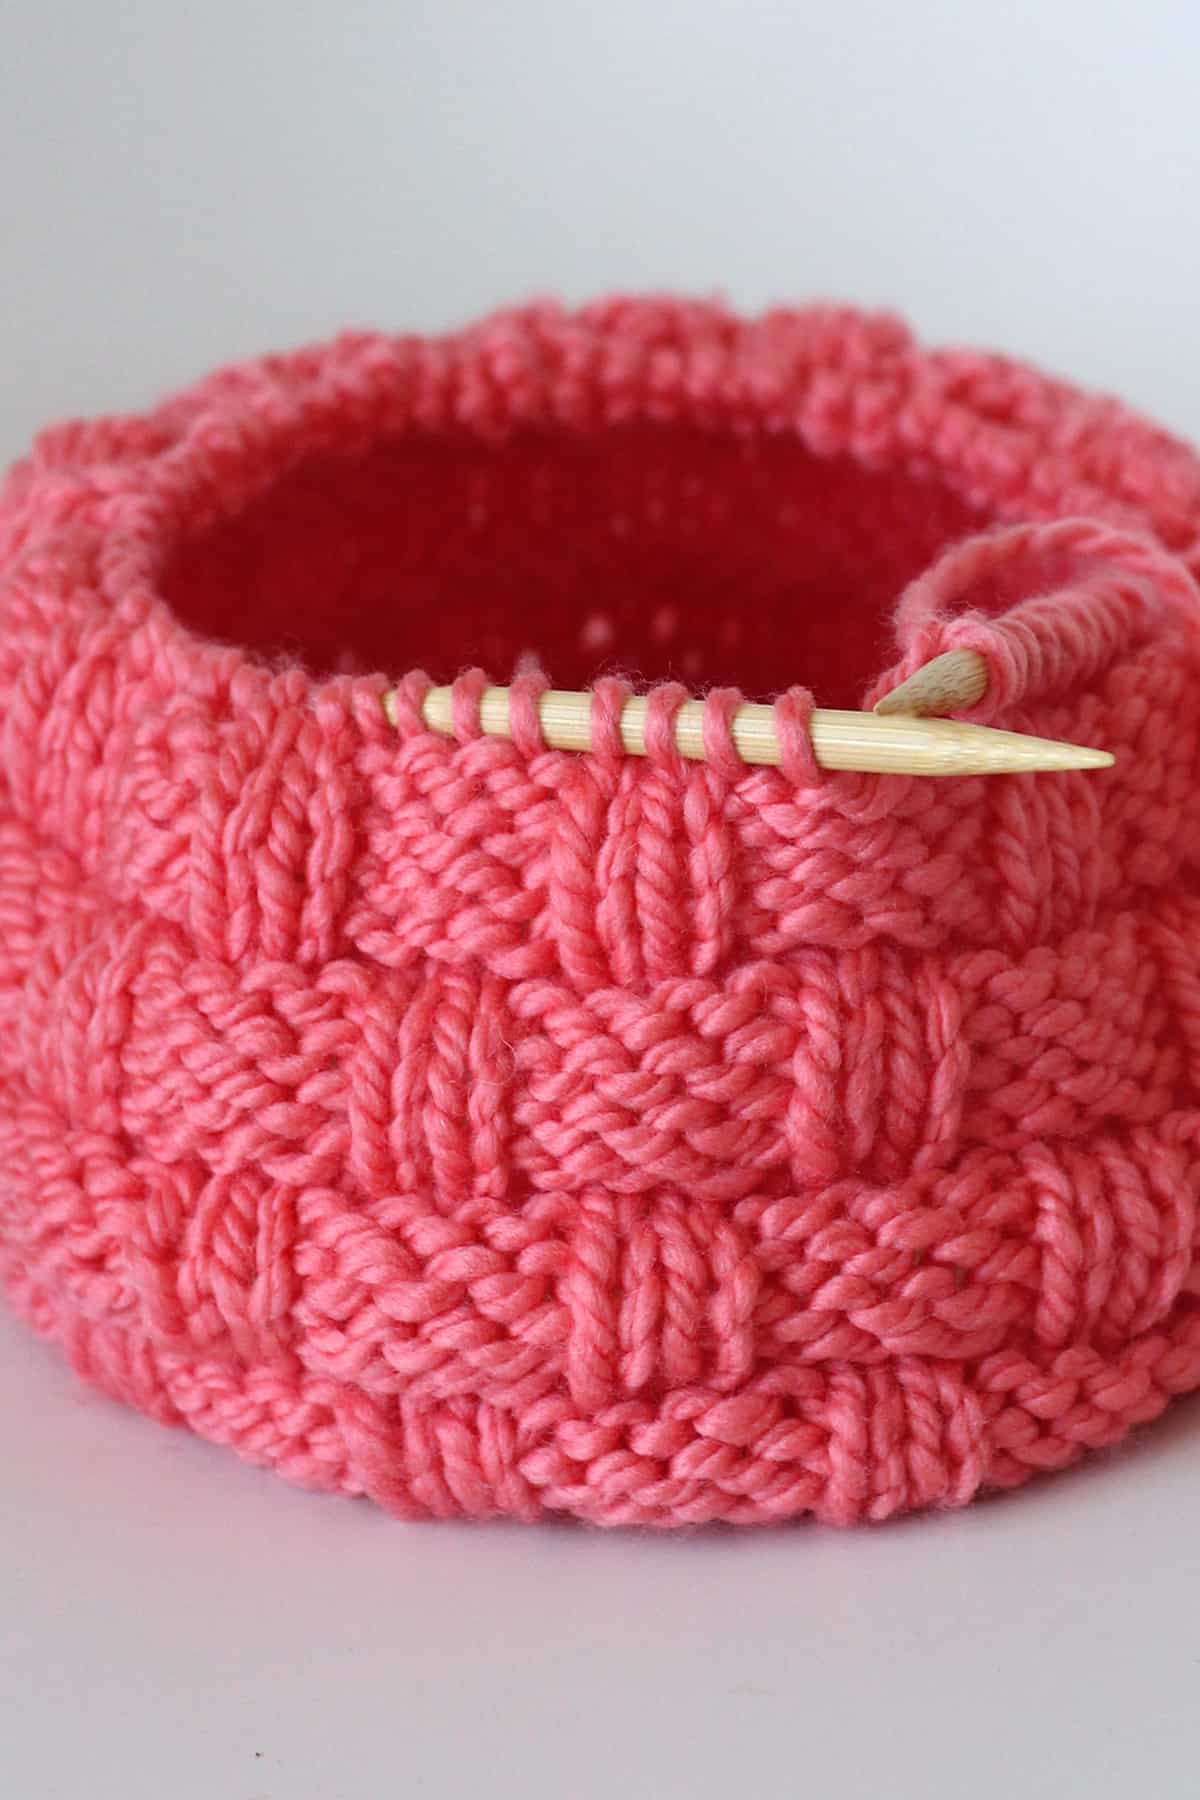 Basket Weave Stitch knitted in the round on circular needles.